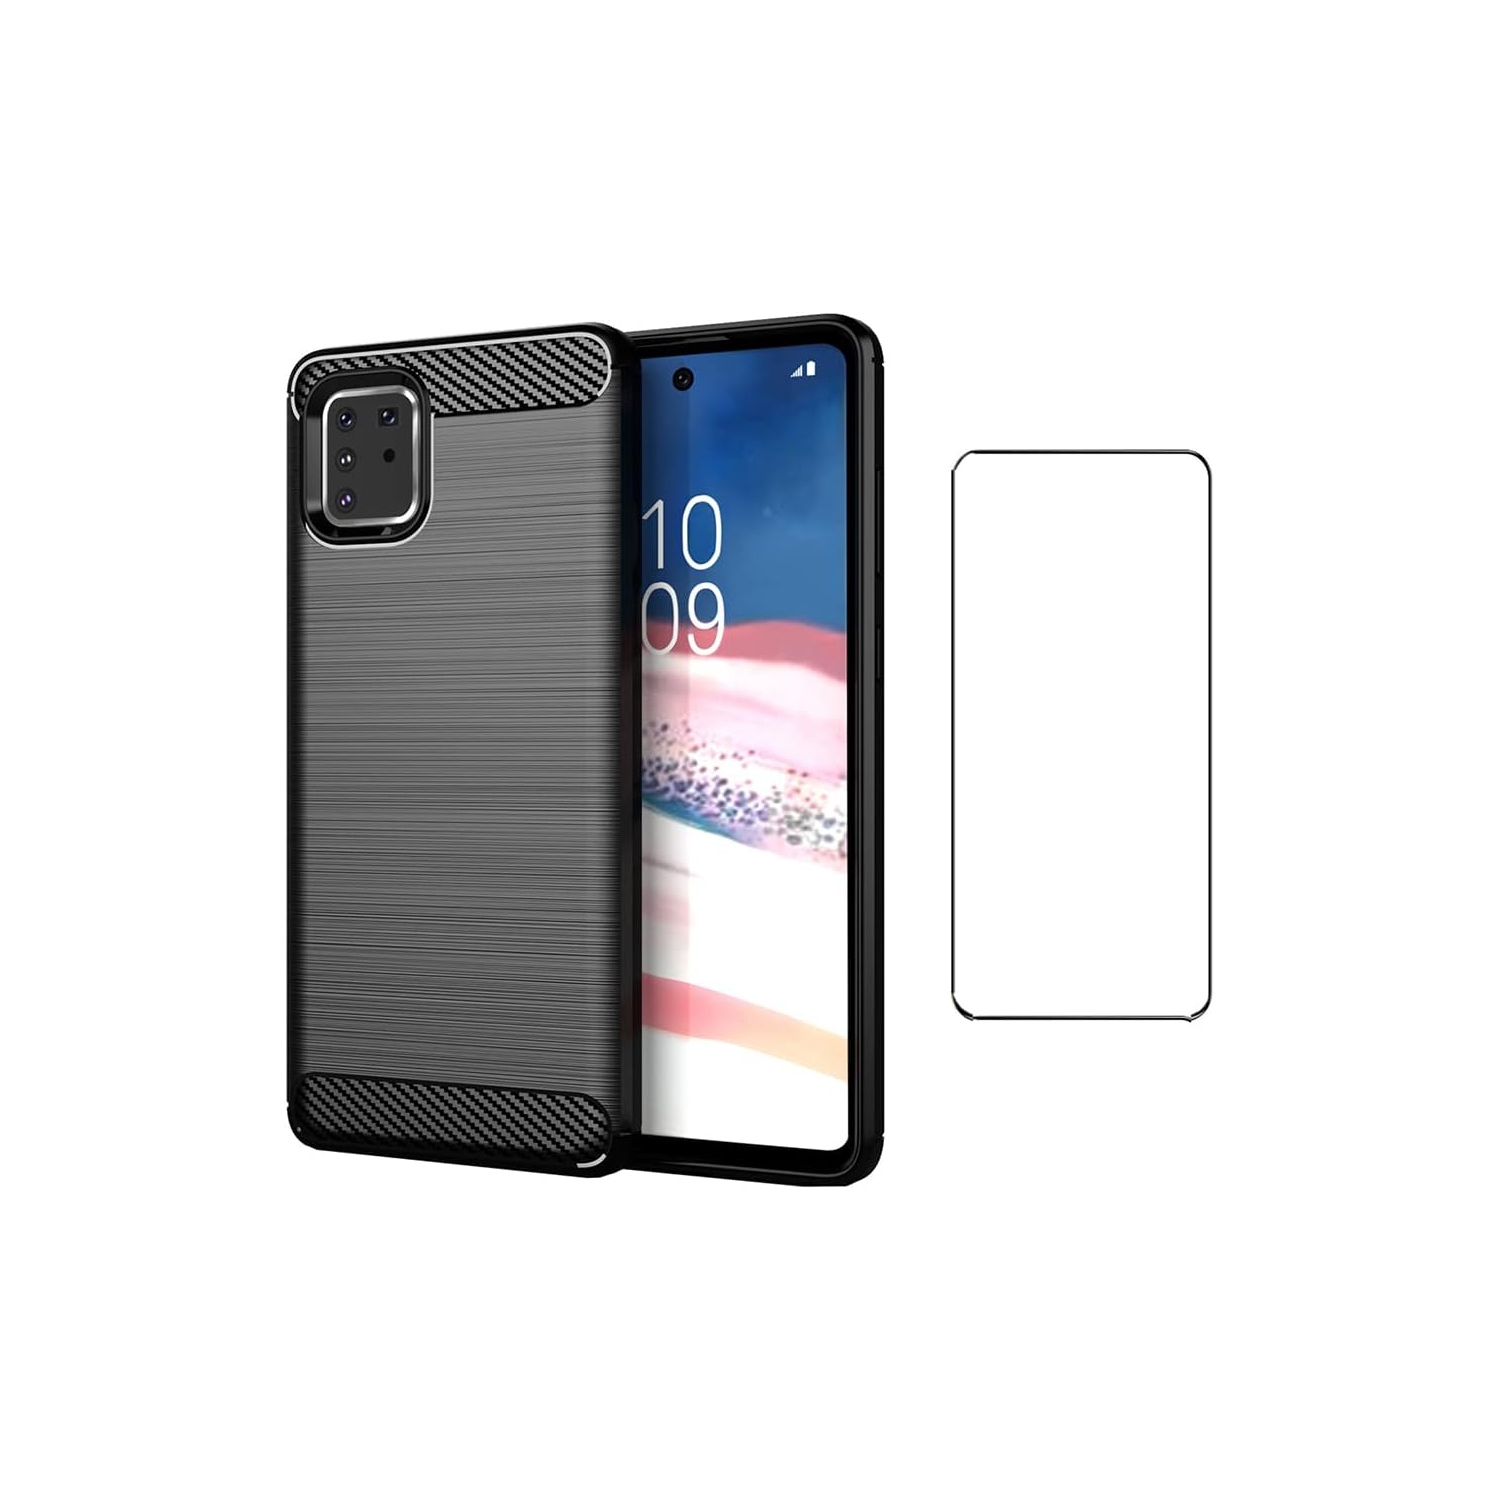 Phone Case for Samsung Galaxy Note 10 Lite with Tempered Glass Screen Protector Cover and Cell Accessories